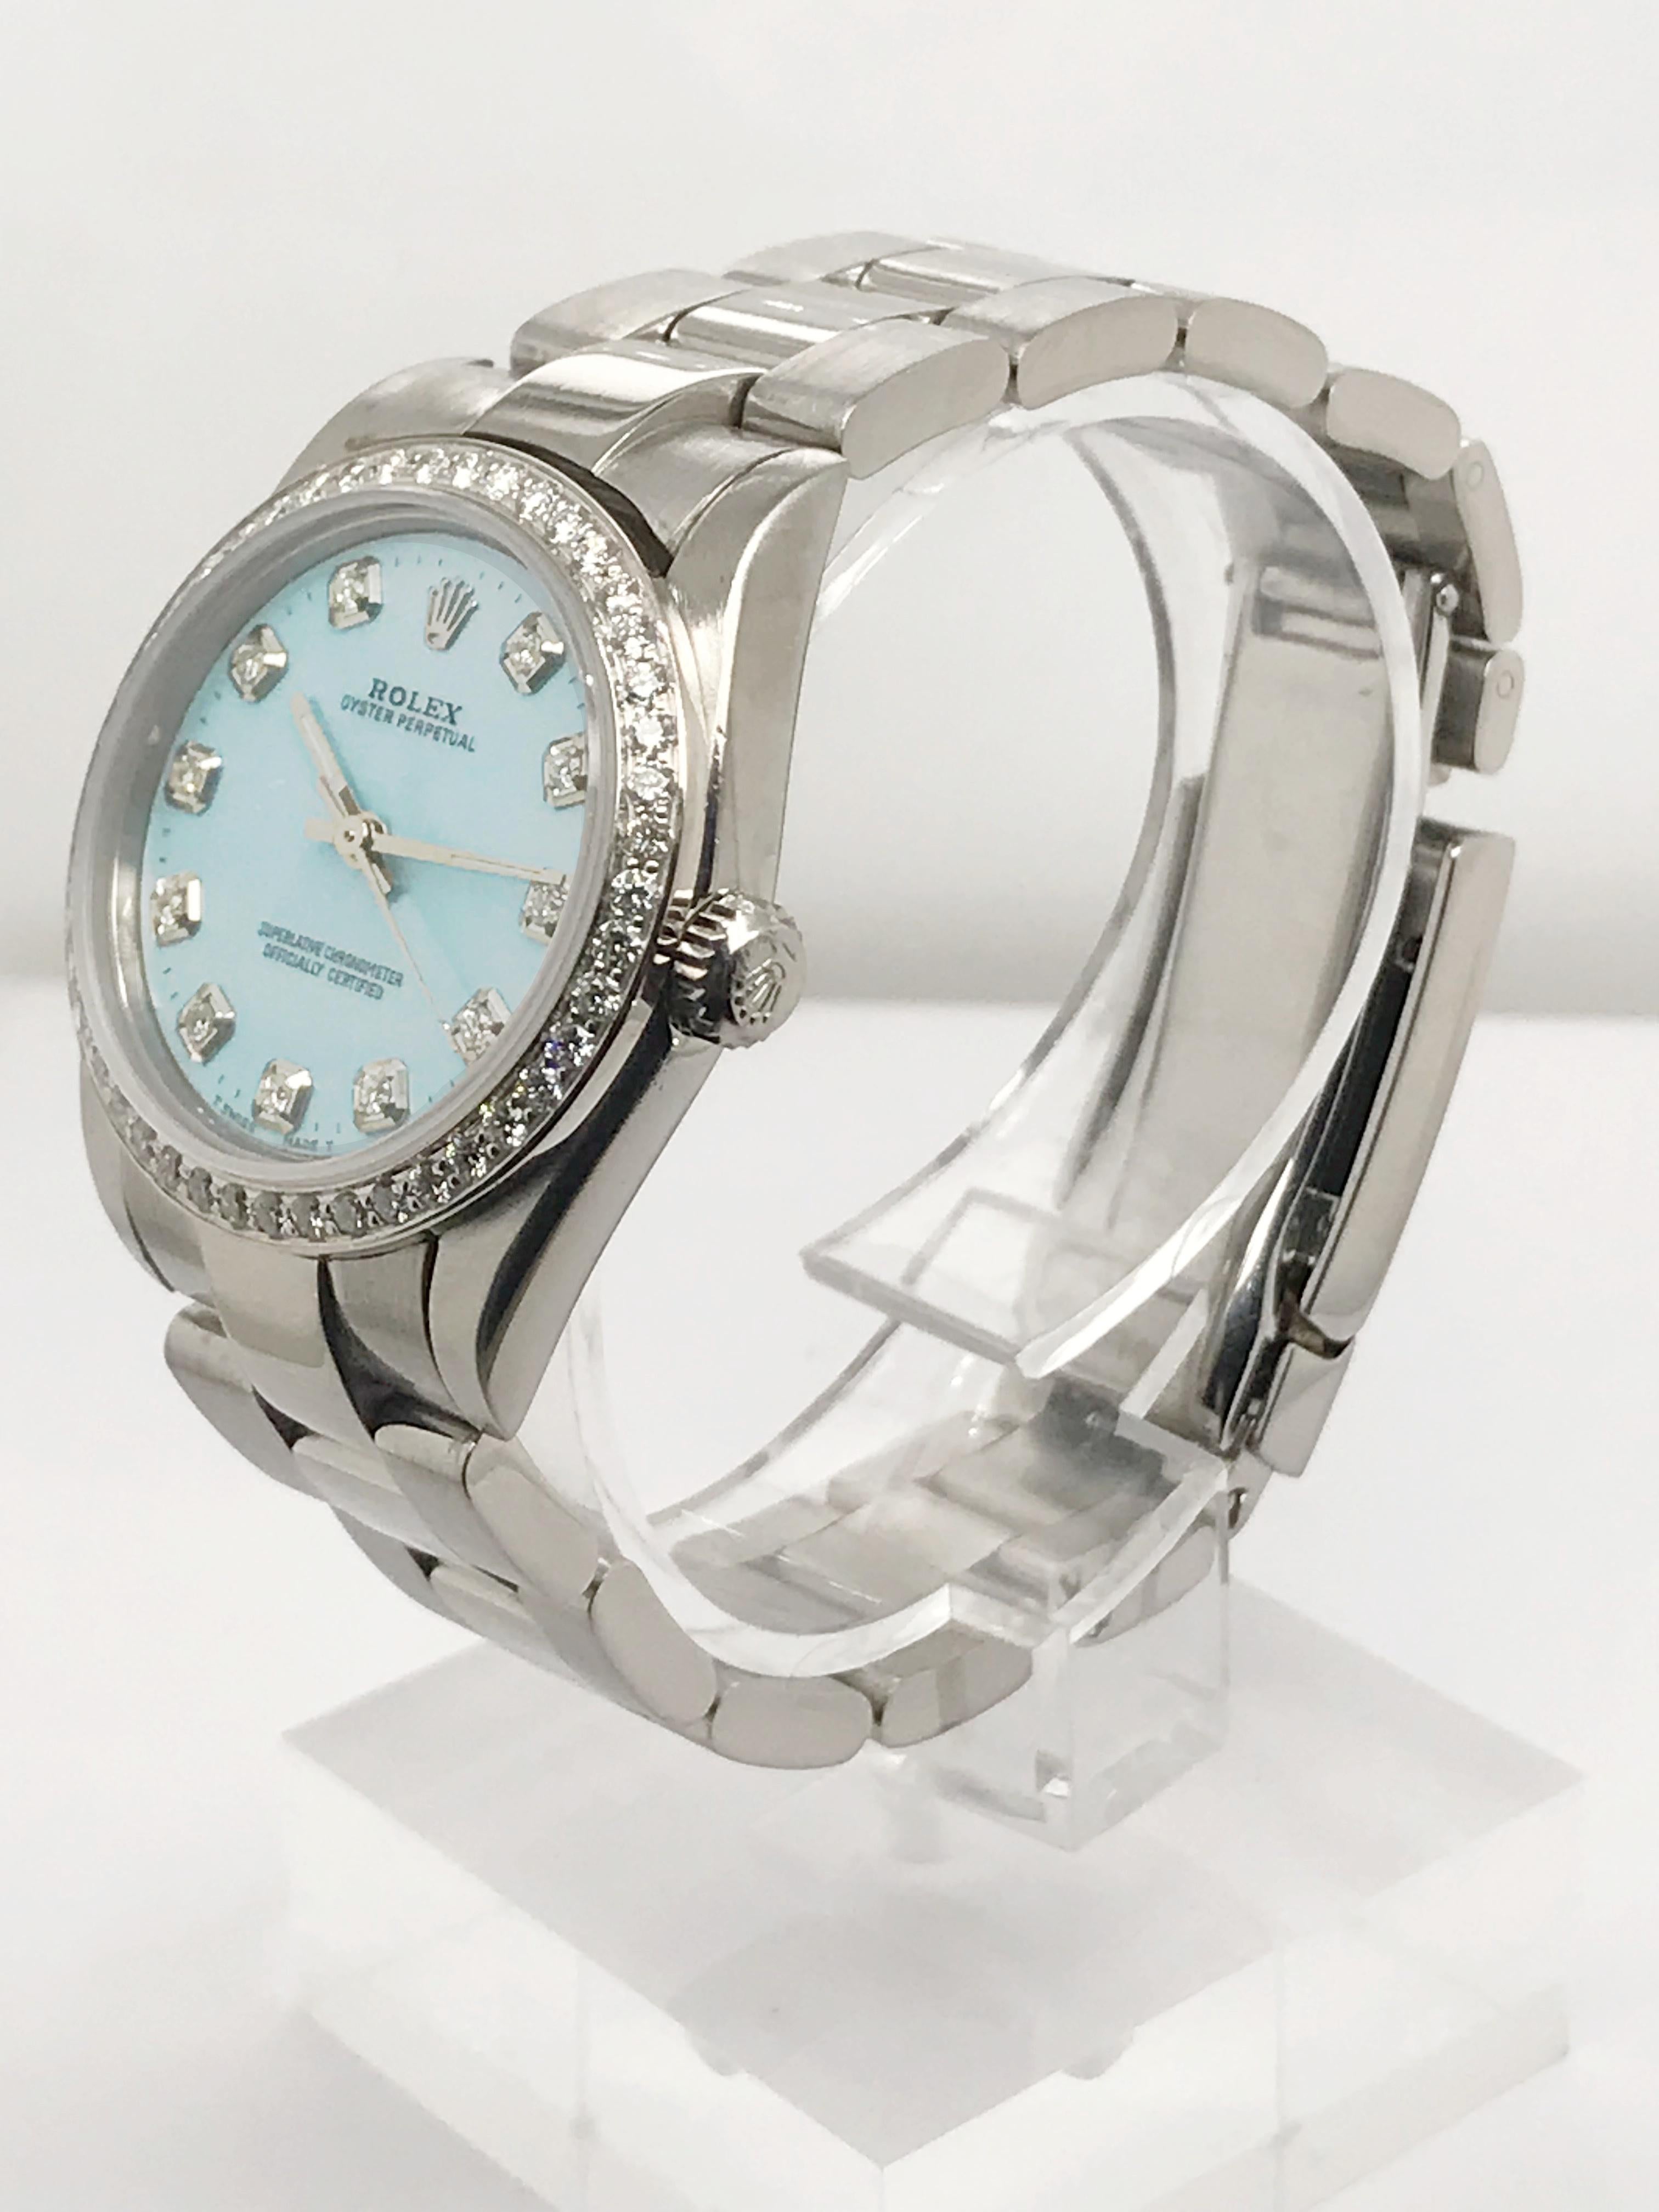 This Stainless Steel 31mm Midsize Rolex offers a beautiful pop if Icy blue color with its dial that also features sparkling diamond markers. Oyster link bracelet in stainless steel with flip lock clasp. Also featuring a diamond bezel this watch is